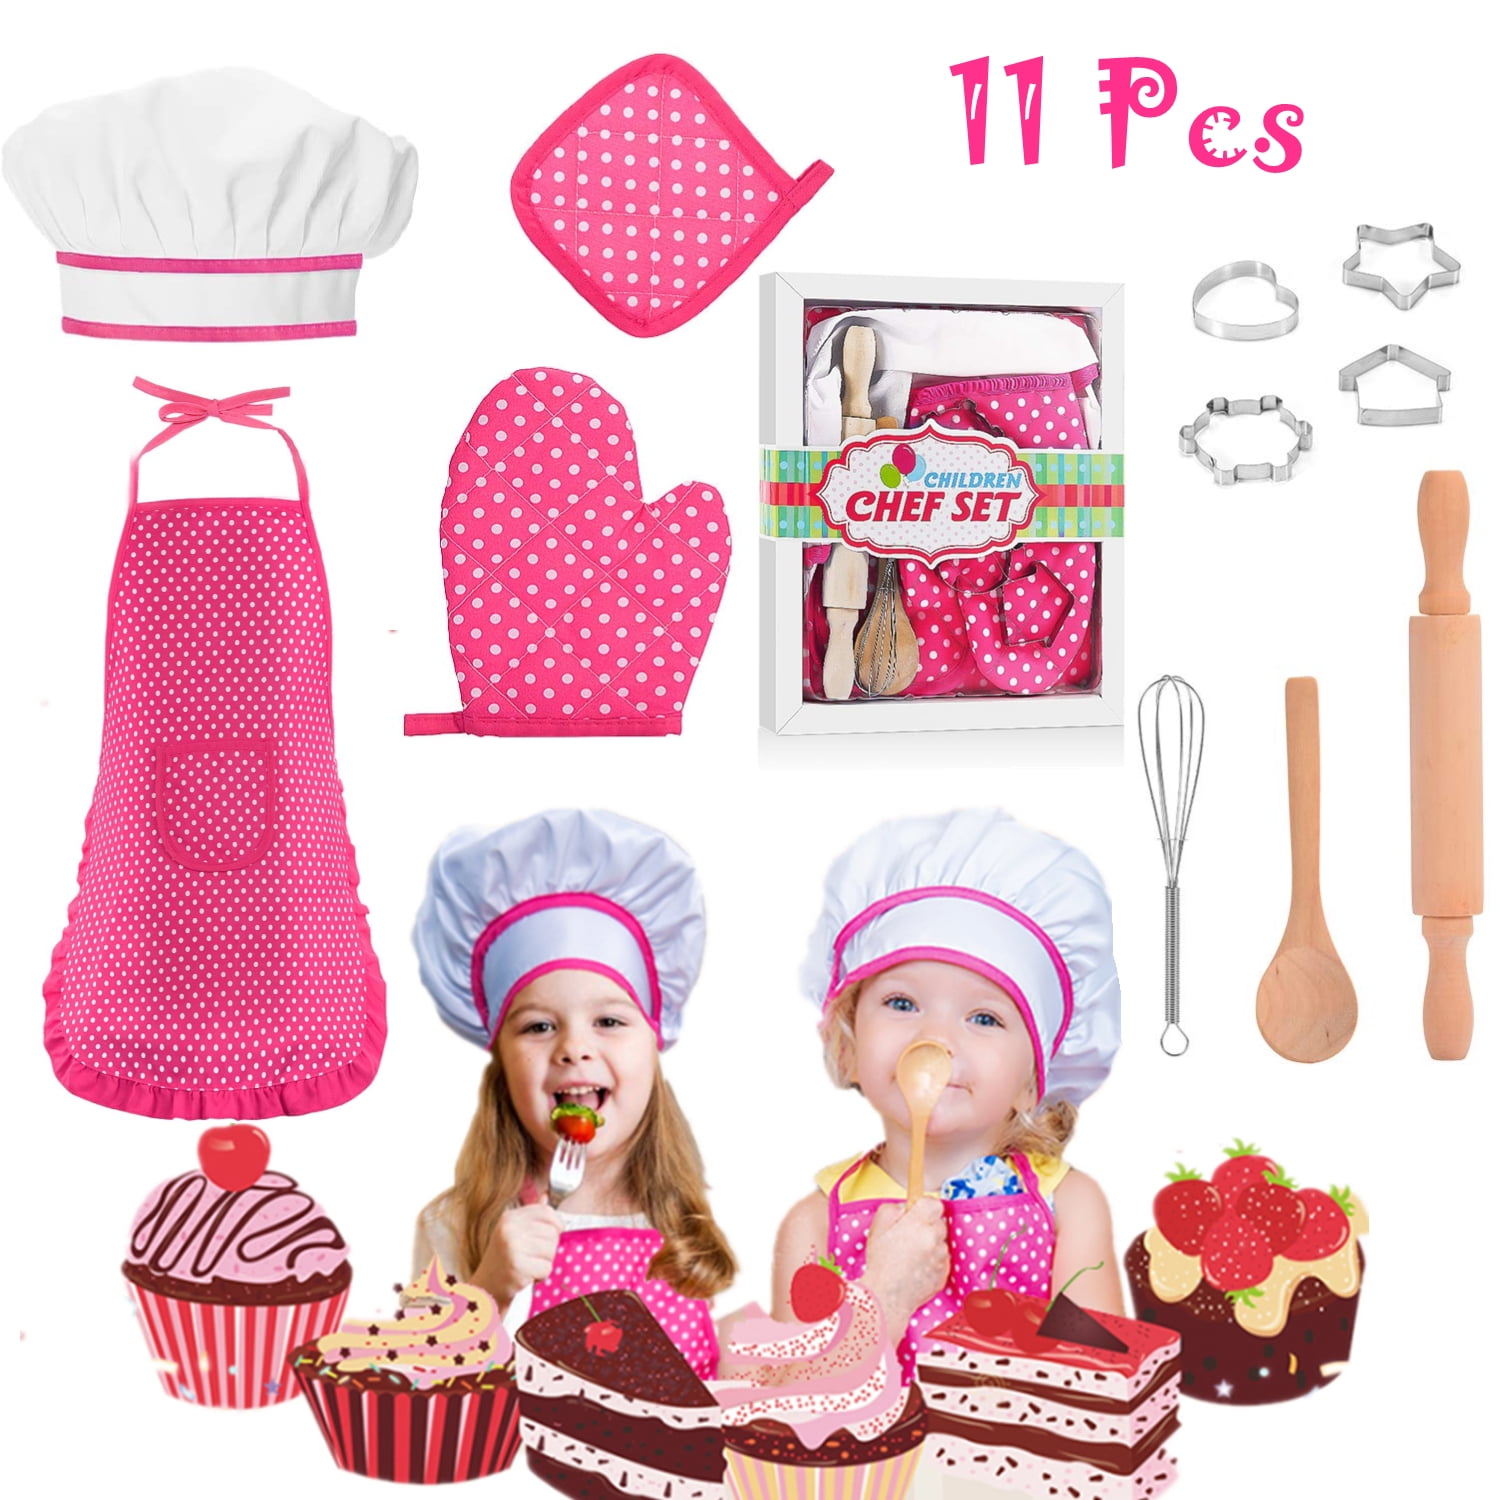 *NEW* Kids Chef Set Kitchen Cooking and Baking Kits Pretend Play Dress Up Role 